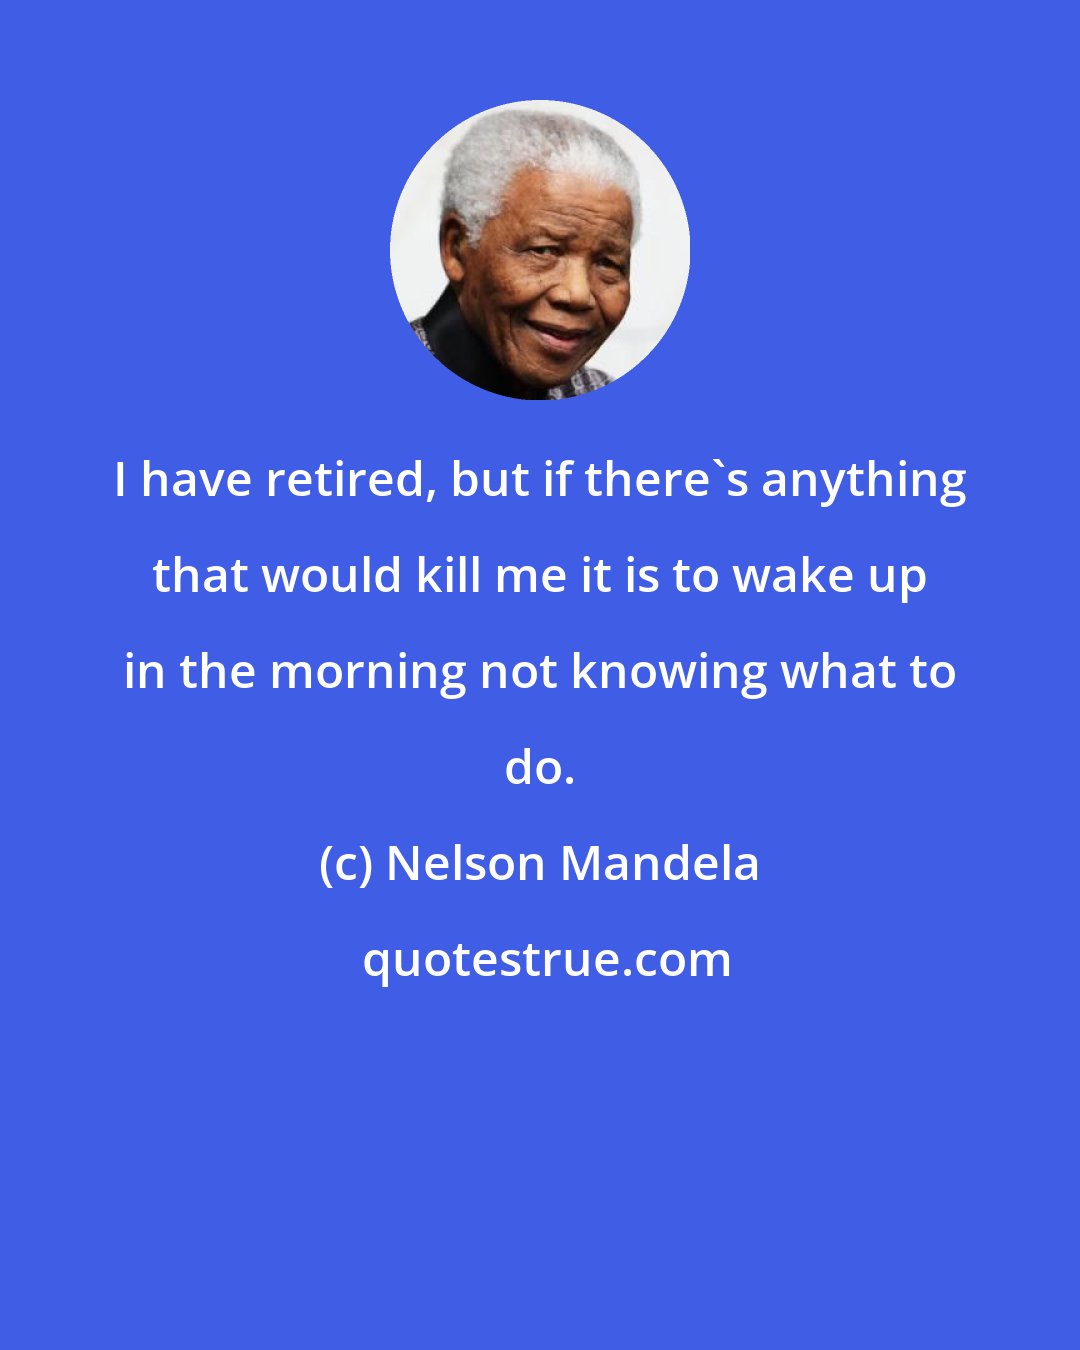 Nelson Mandela: I have retired, but if there's anything that would kill me it is to wake up in the morning not knowing what to do.